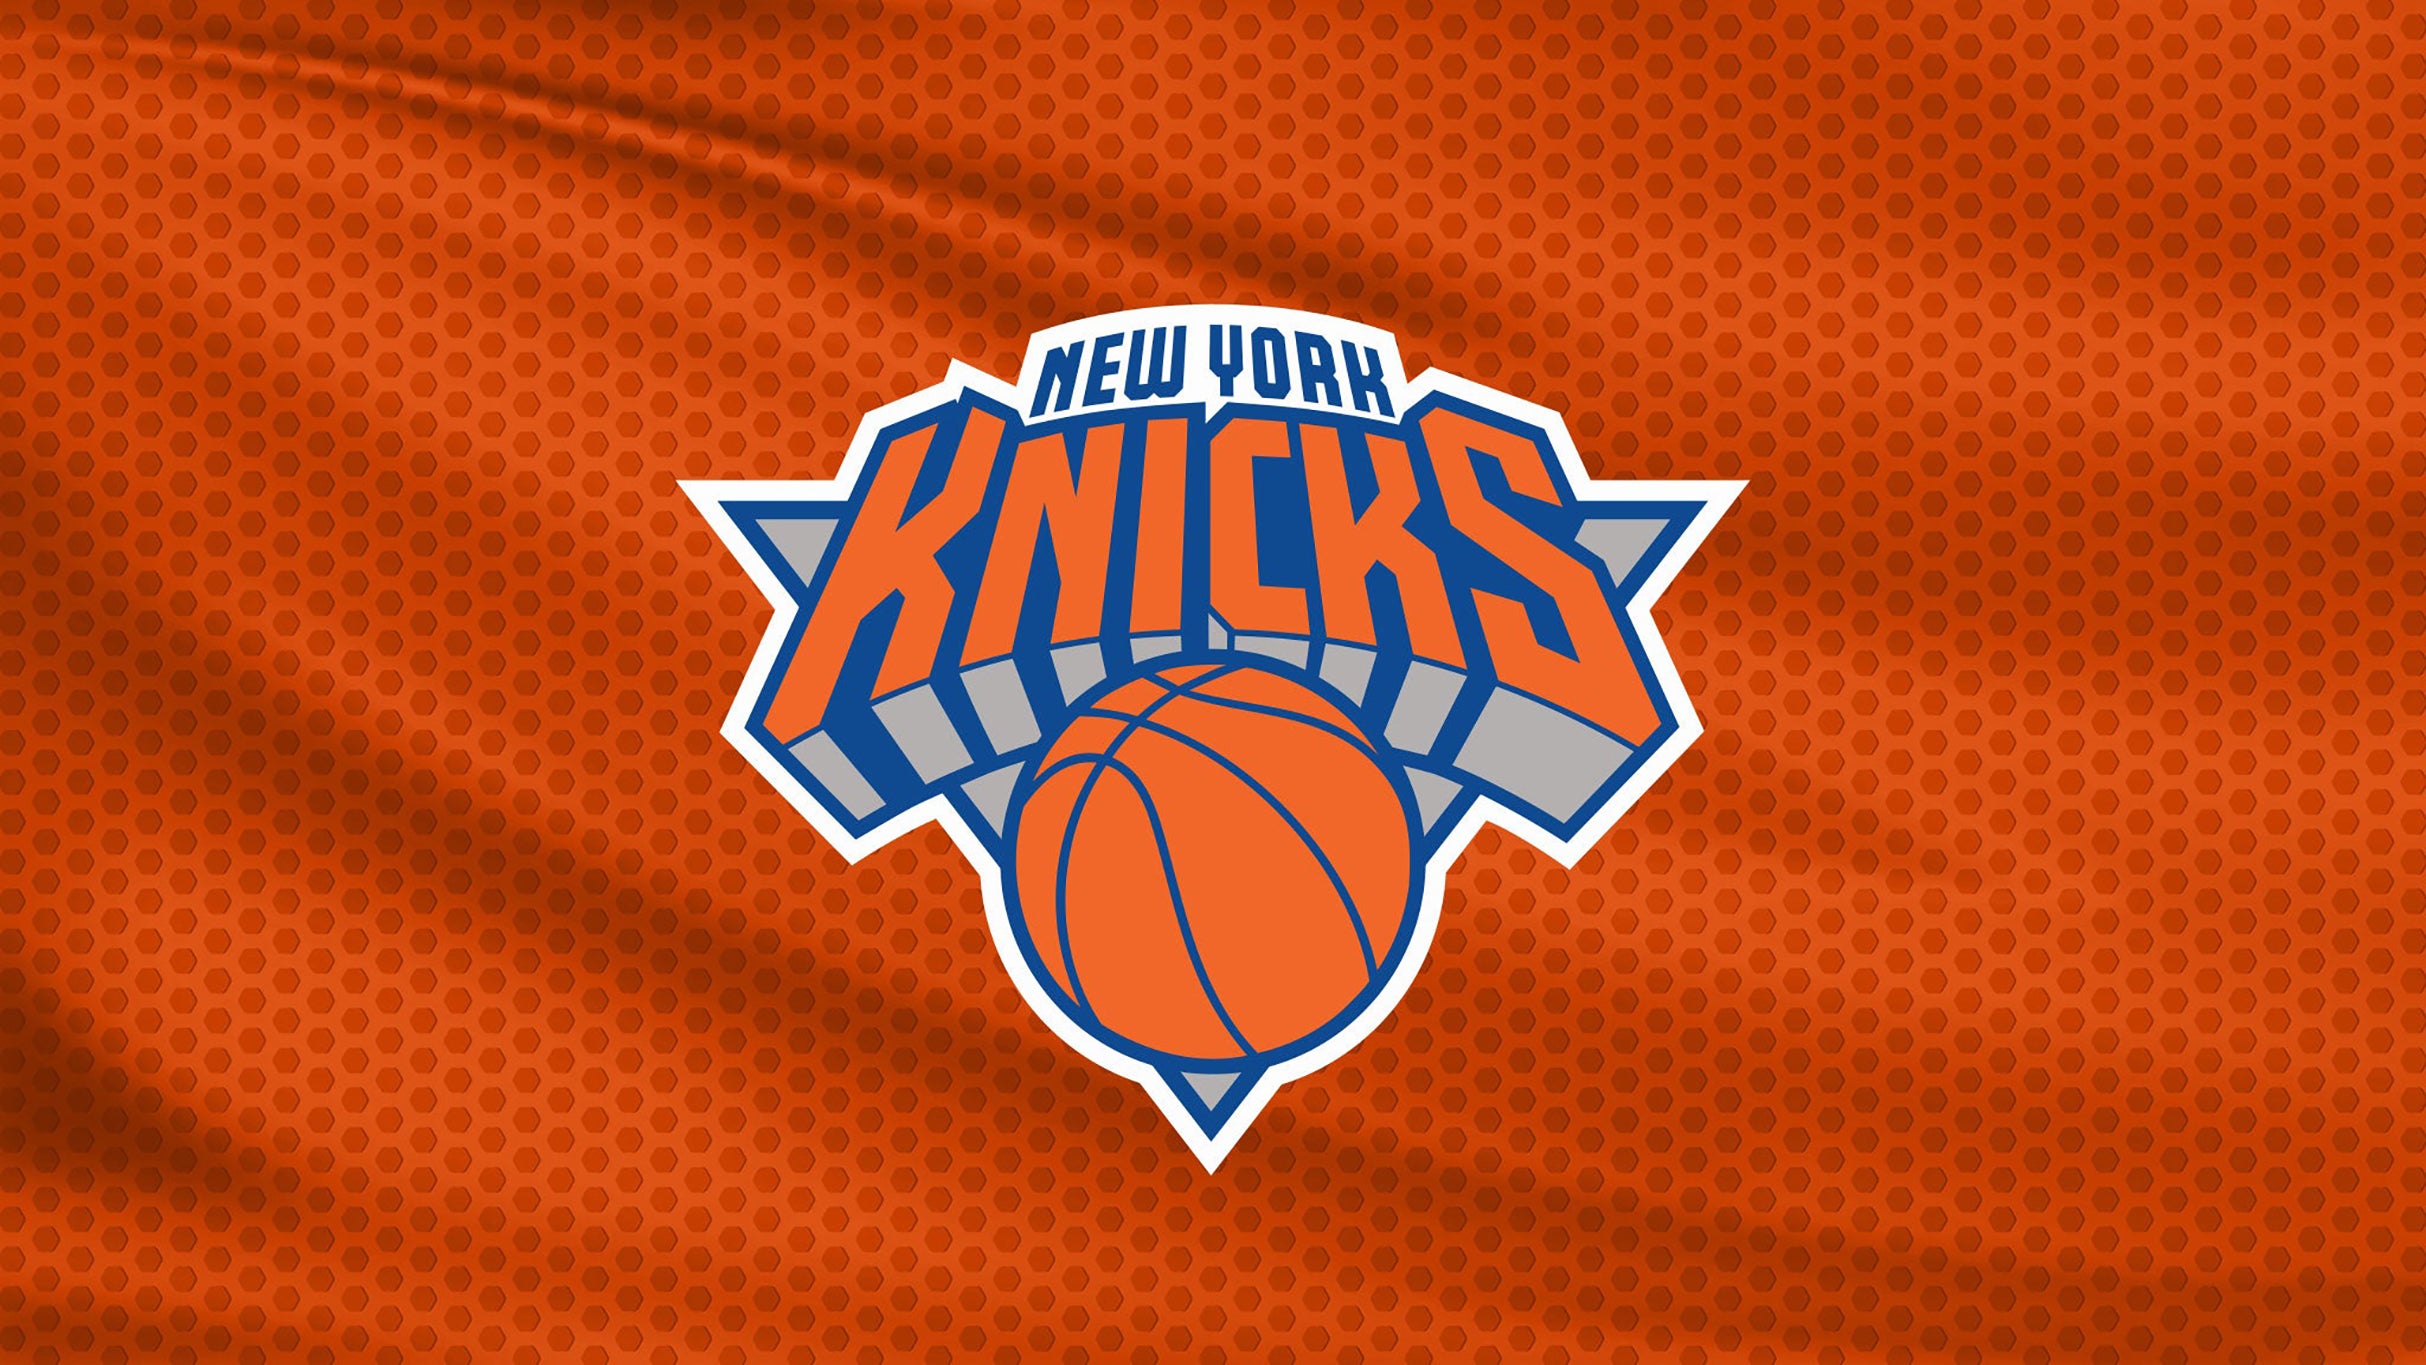 NBA Finals: TBD at Knicks Rd 4 Hm Gm 3 in New York promo photo for MSG Fan-First presale offer code